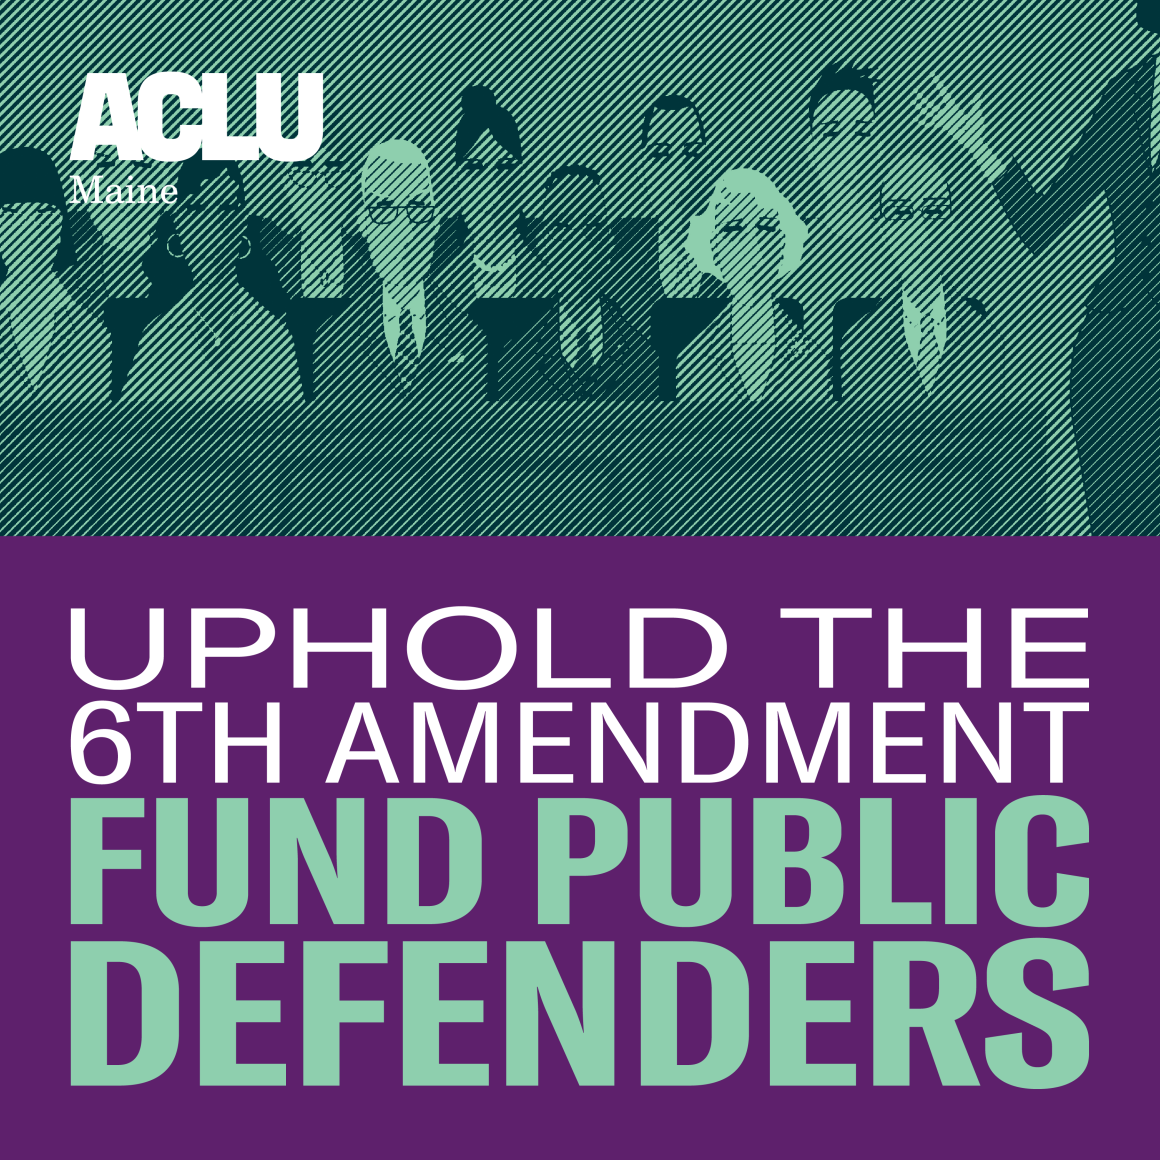 Uphold the 6th Amendment. Fund Public Defenders.